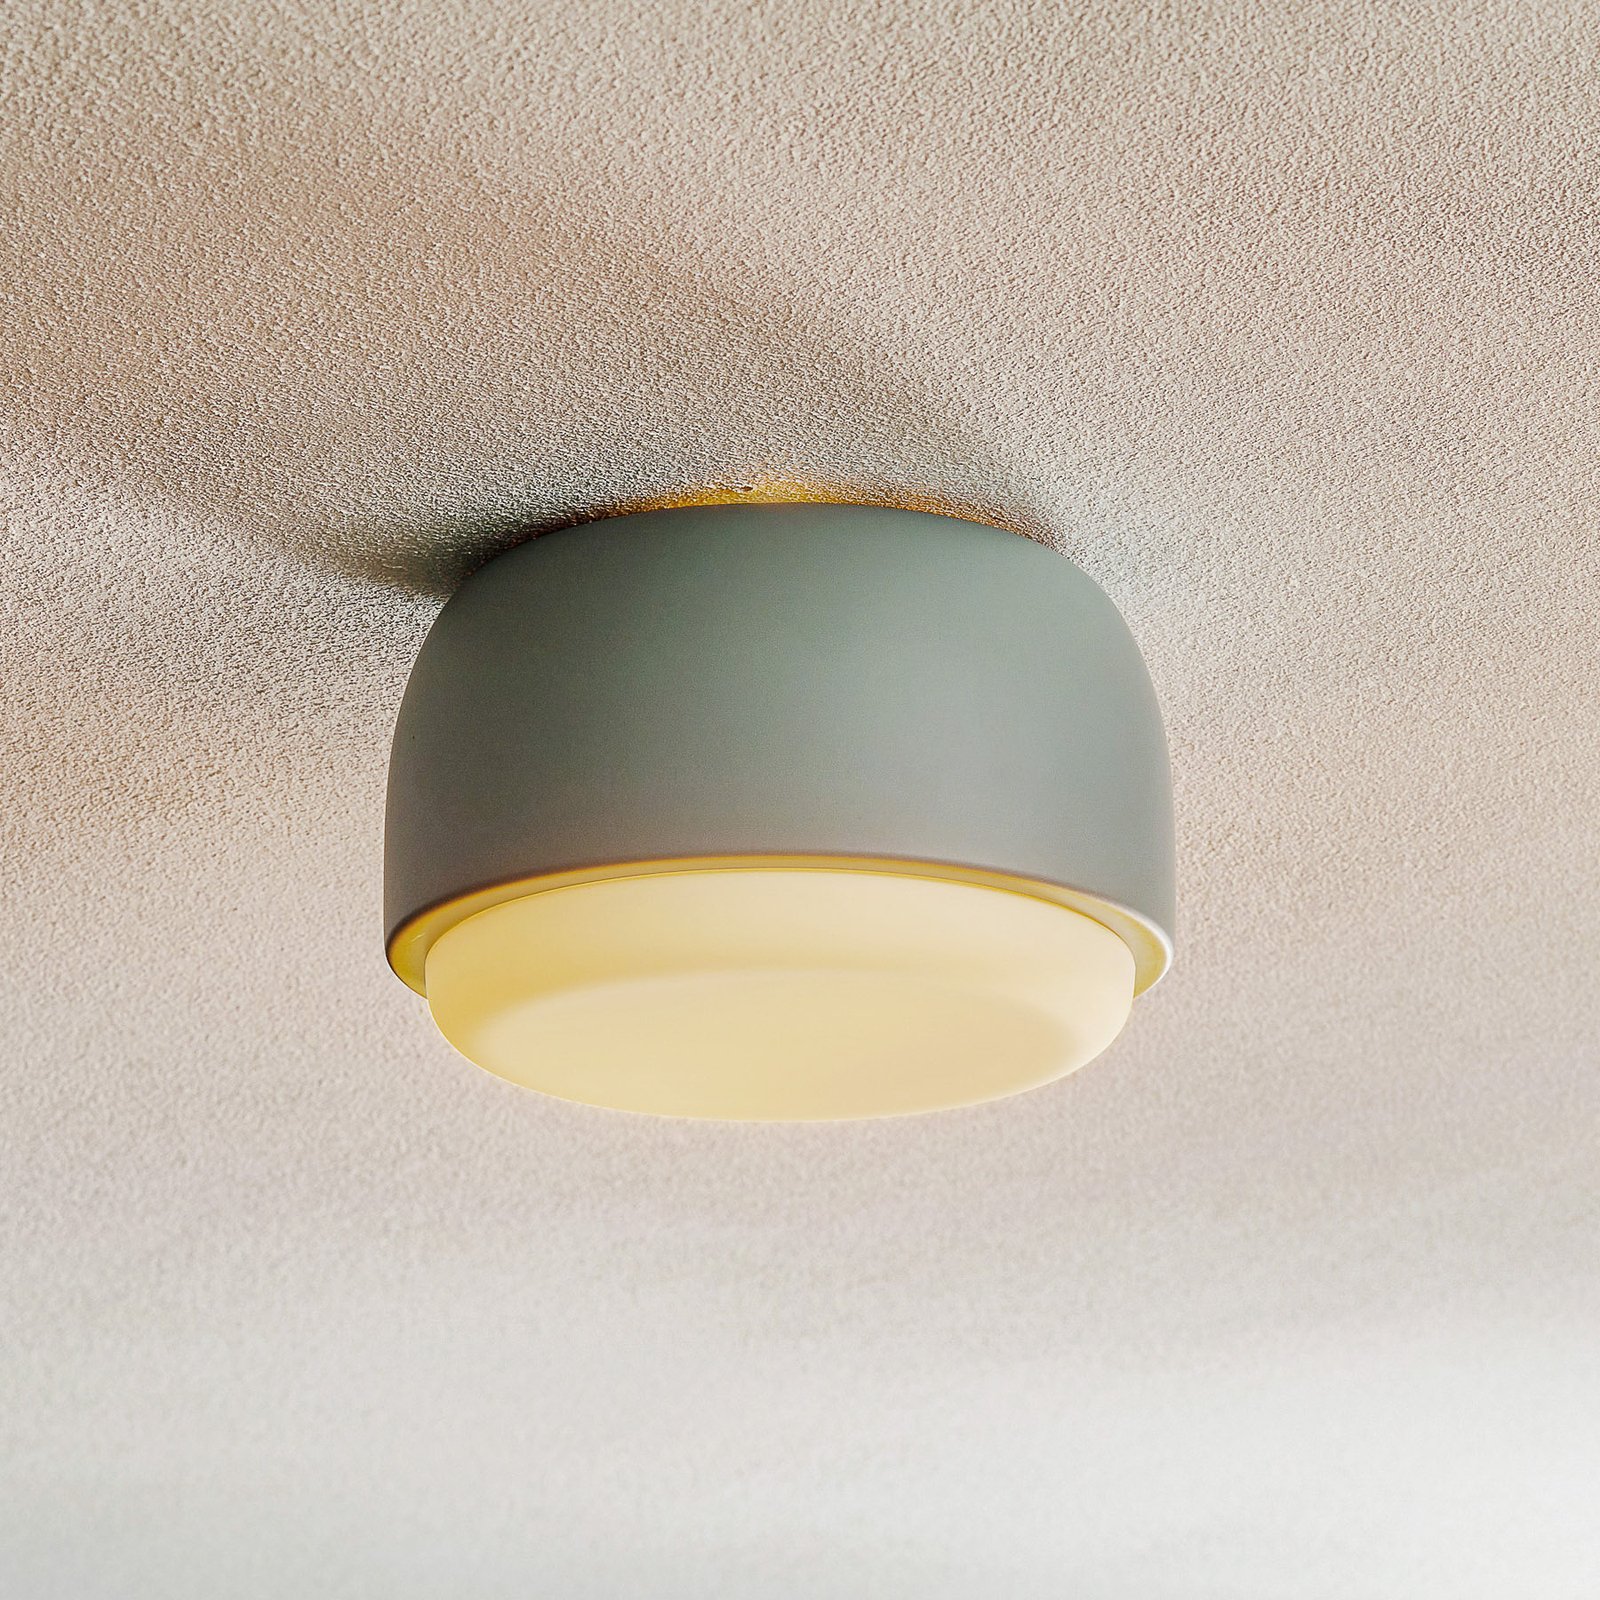 Northern Over Me ceiling light, pale blue 20 cm